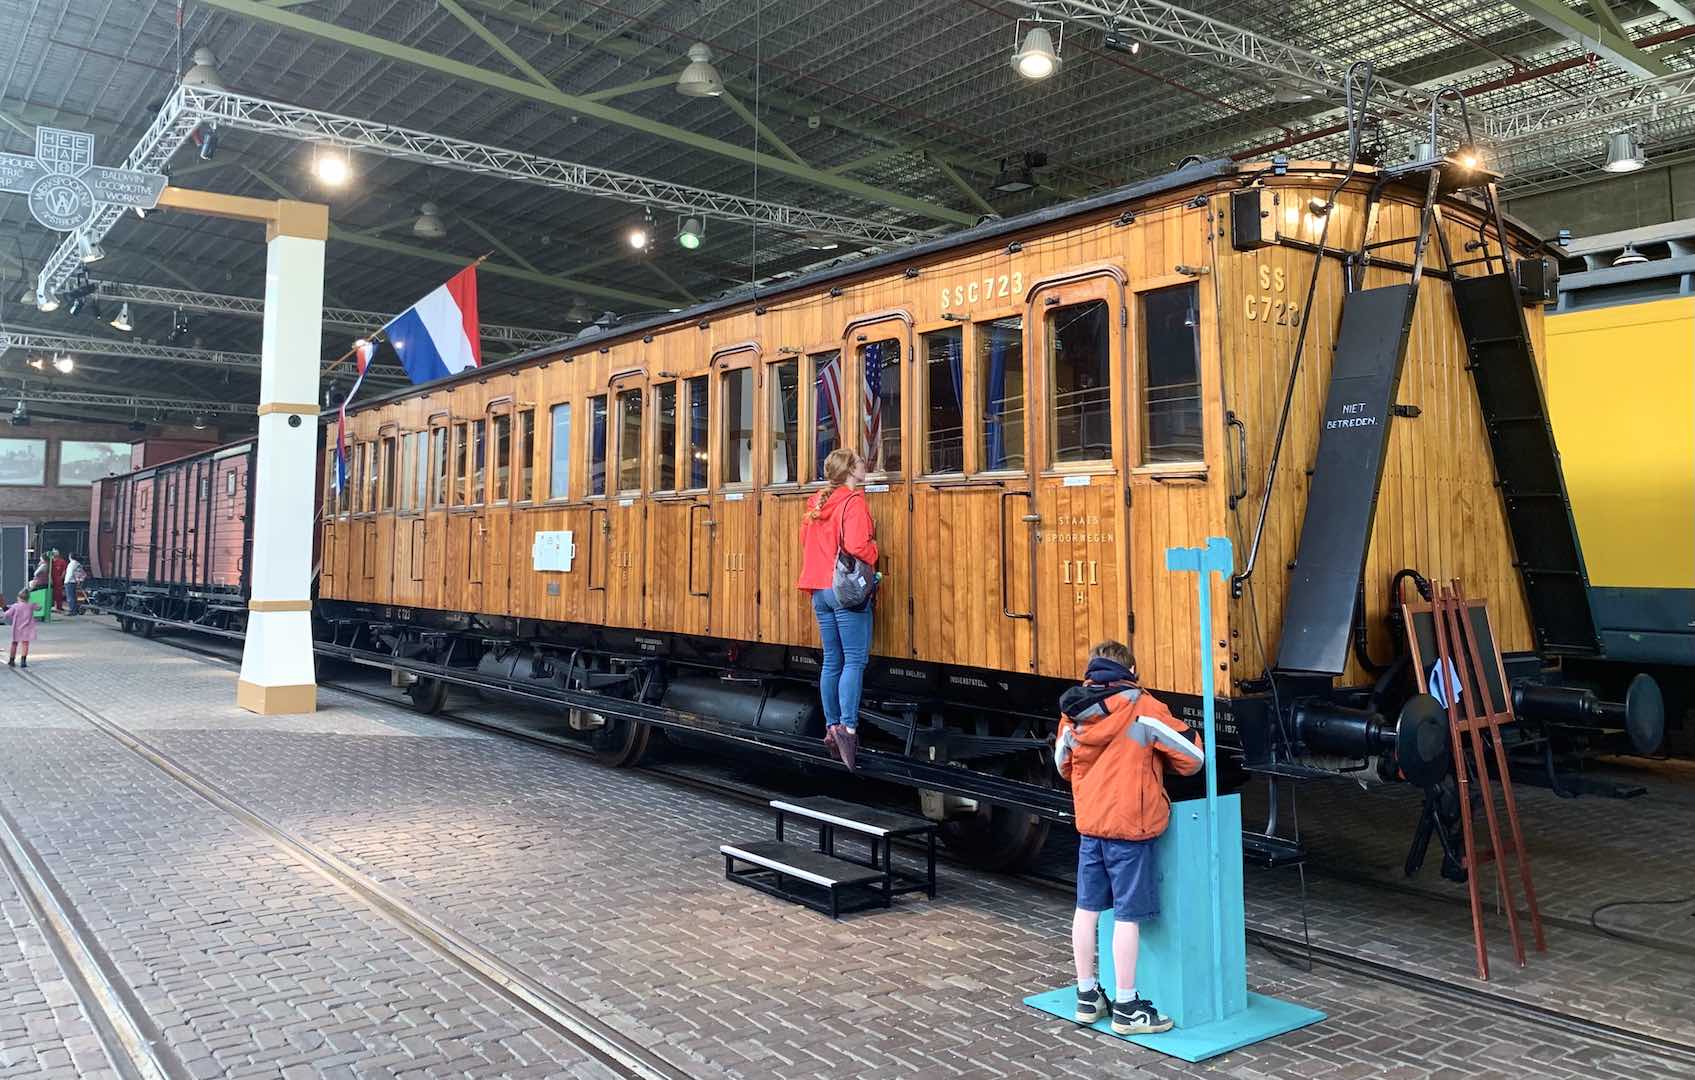 Utrecht's incredible railway museum had a huge range of trains from different eras, exhibits about the development of rail in the Netherlands, and so much more. We spent a full day here!